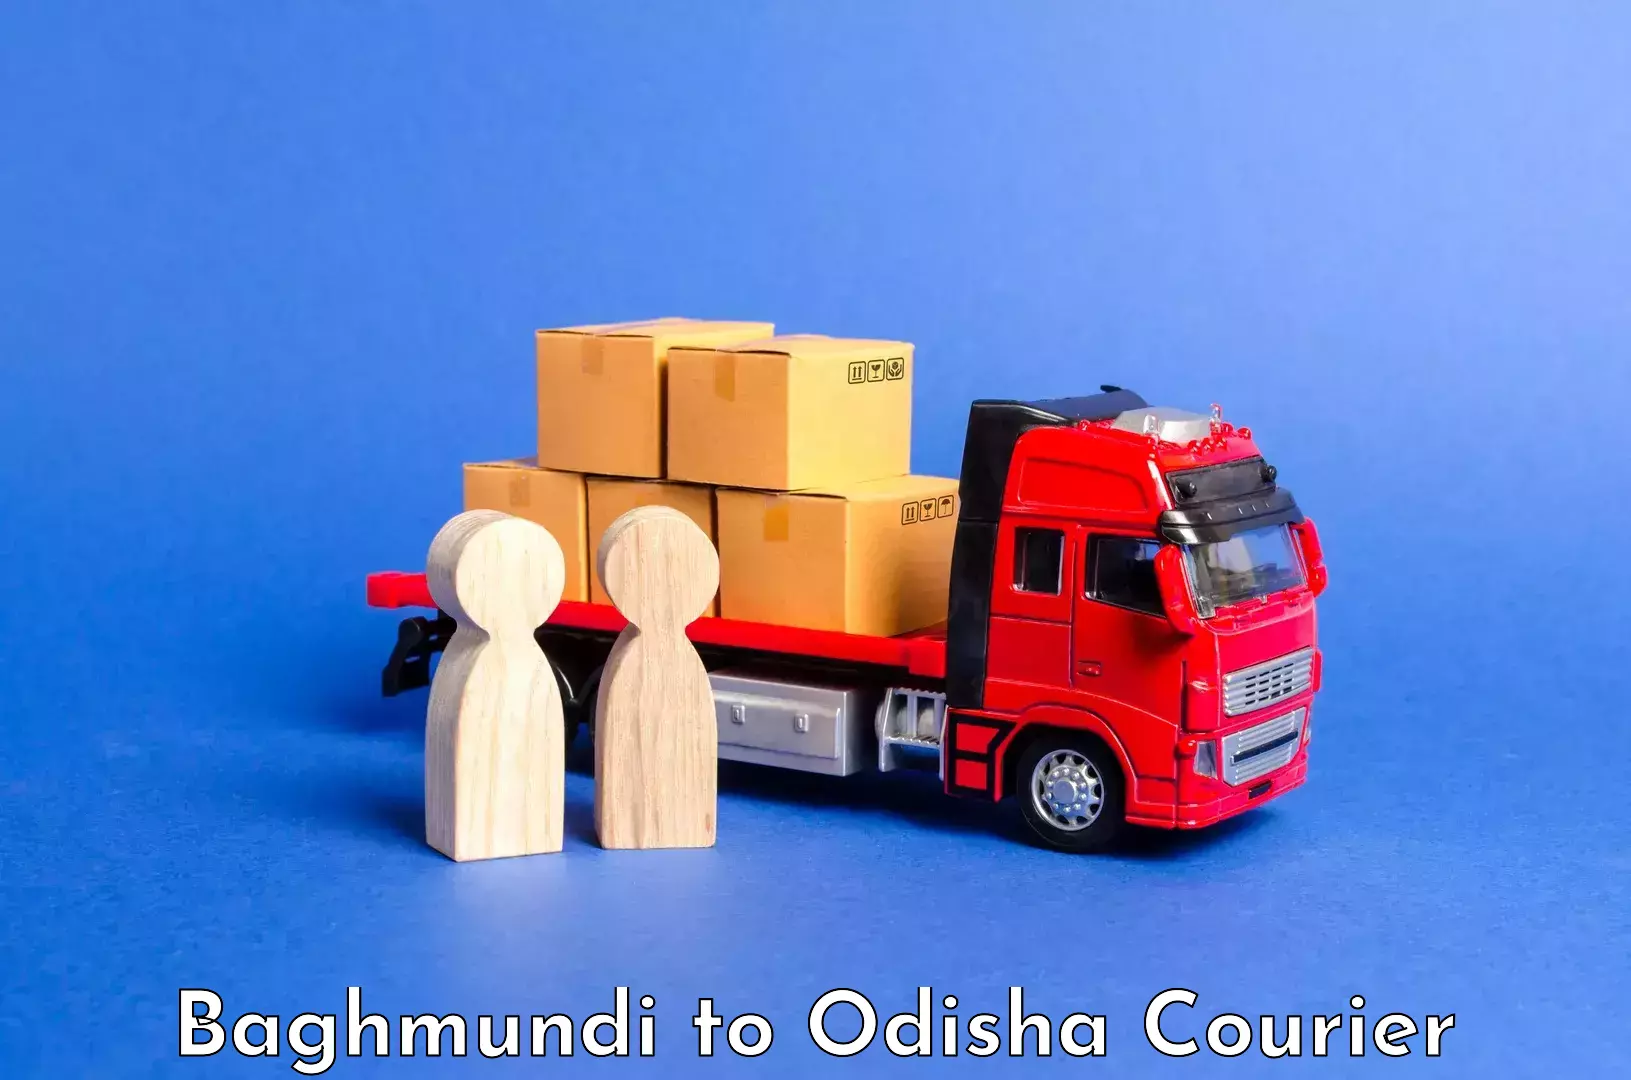 Luggage transport consulting in Baghmundi to Chandipur